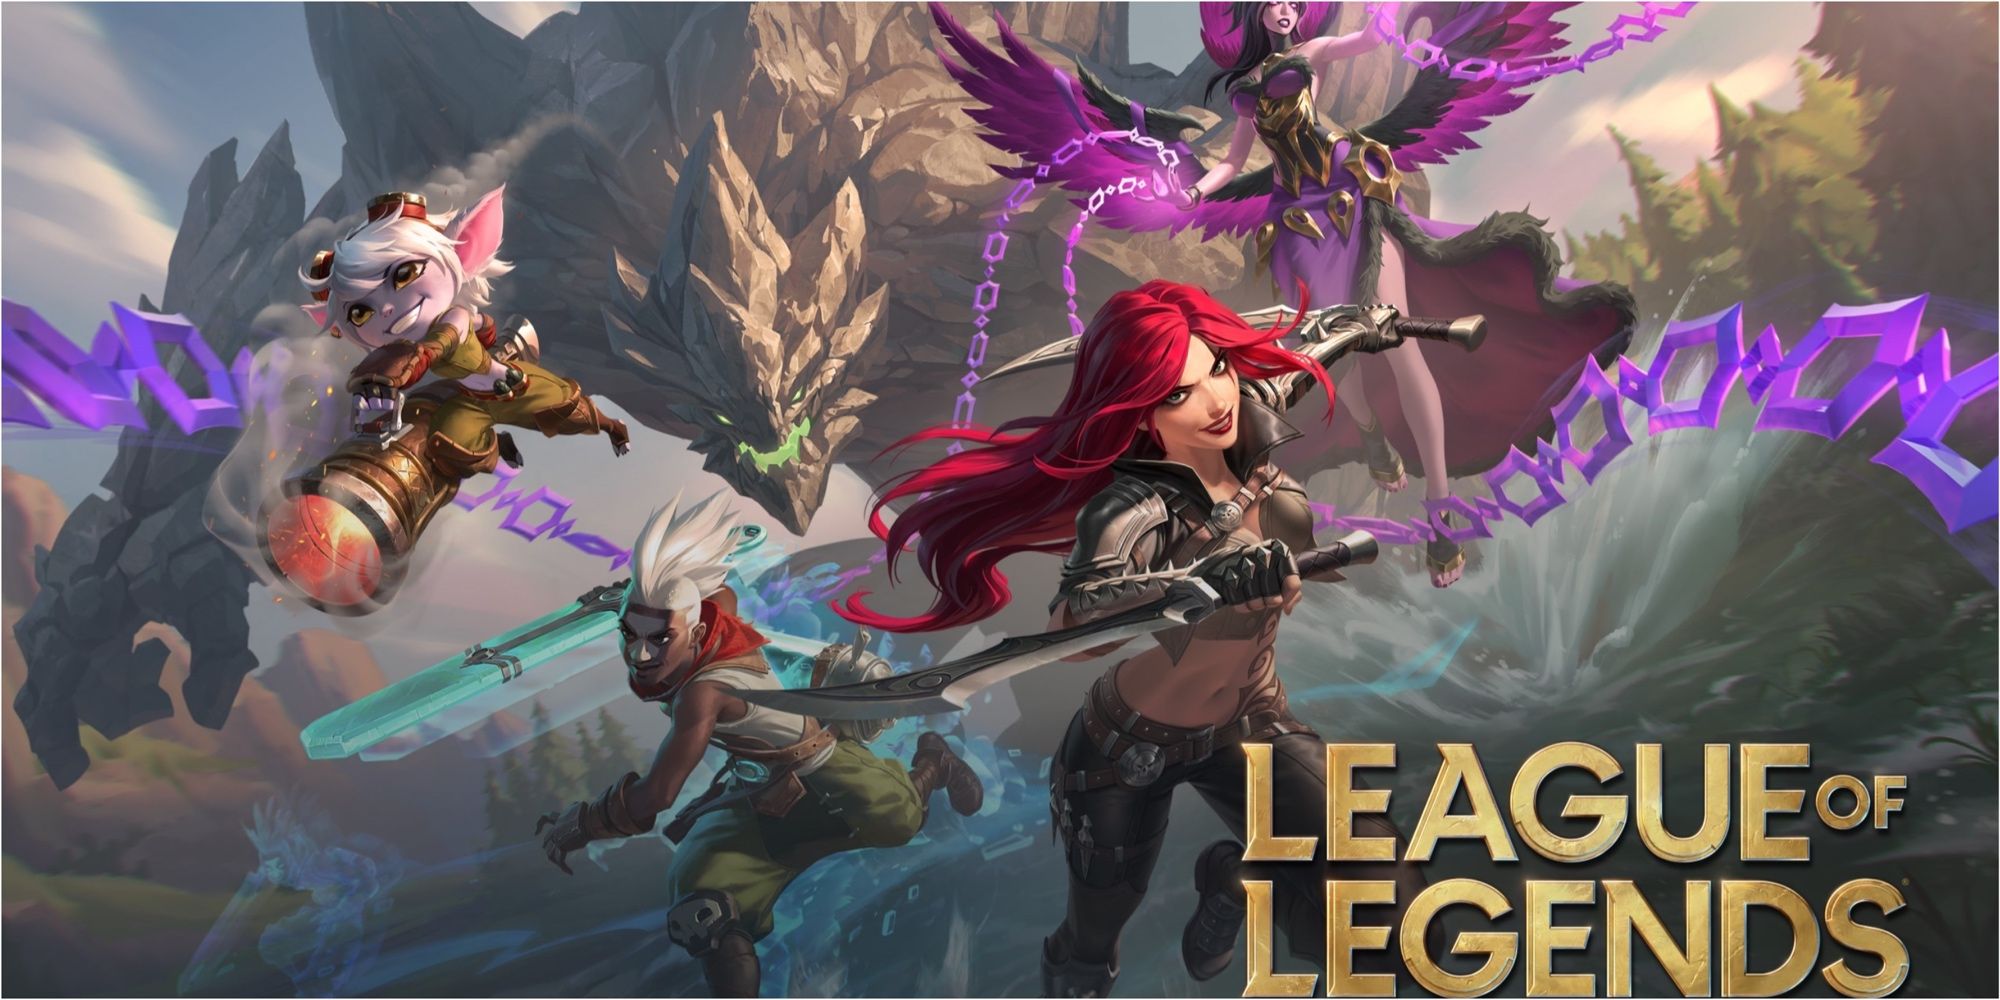 League of Legends official poster with 4 heroes.